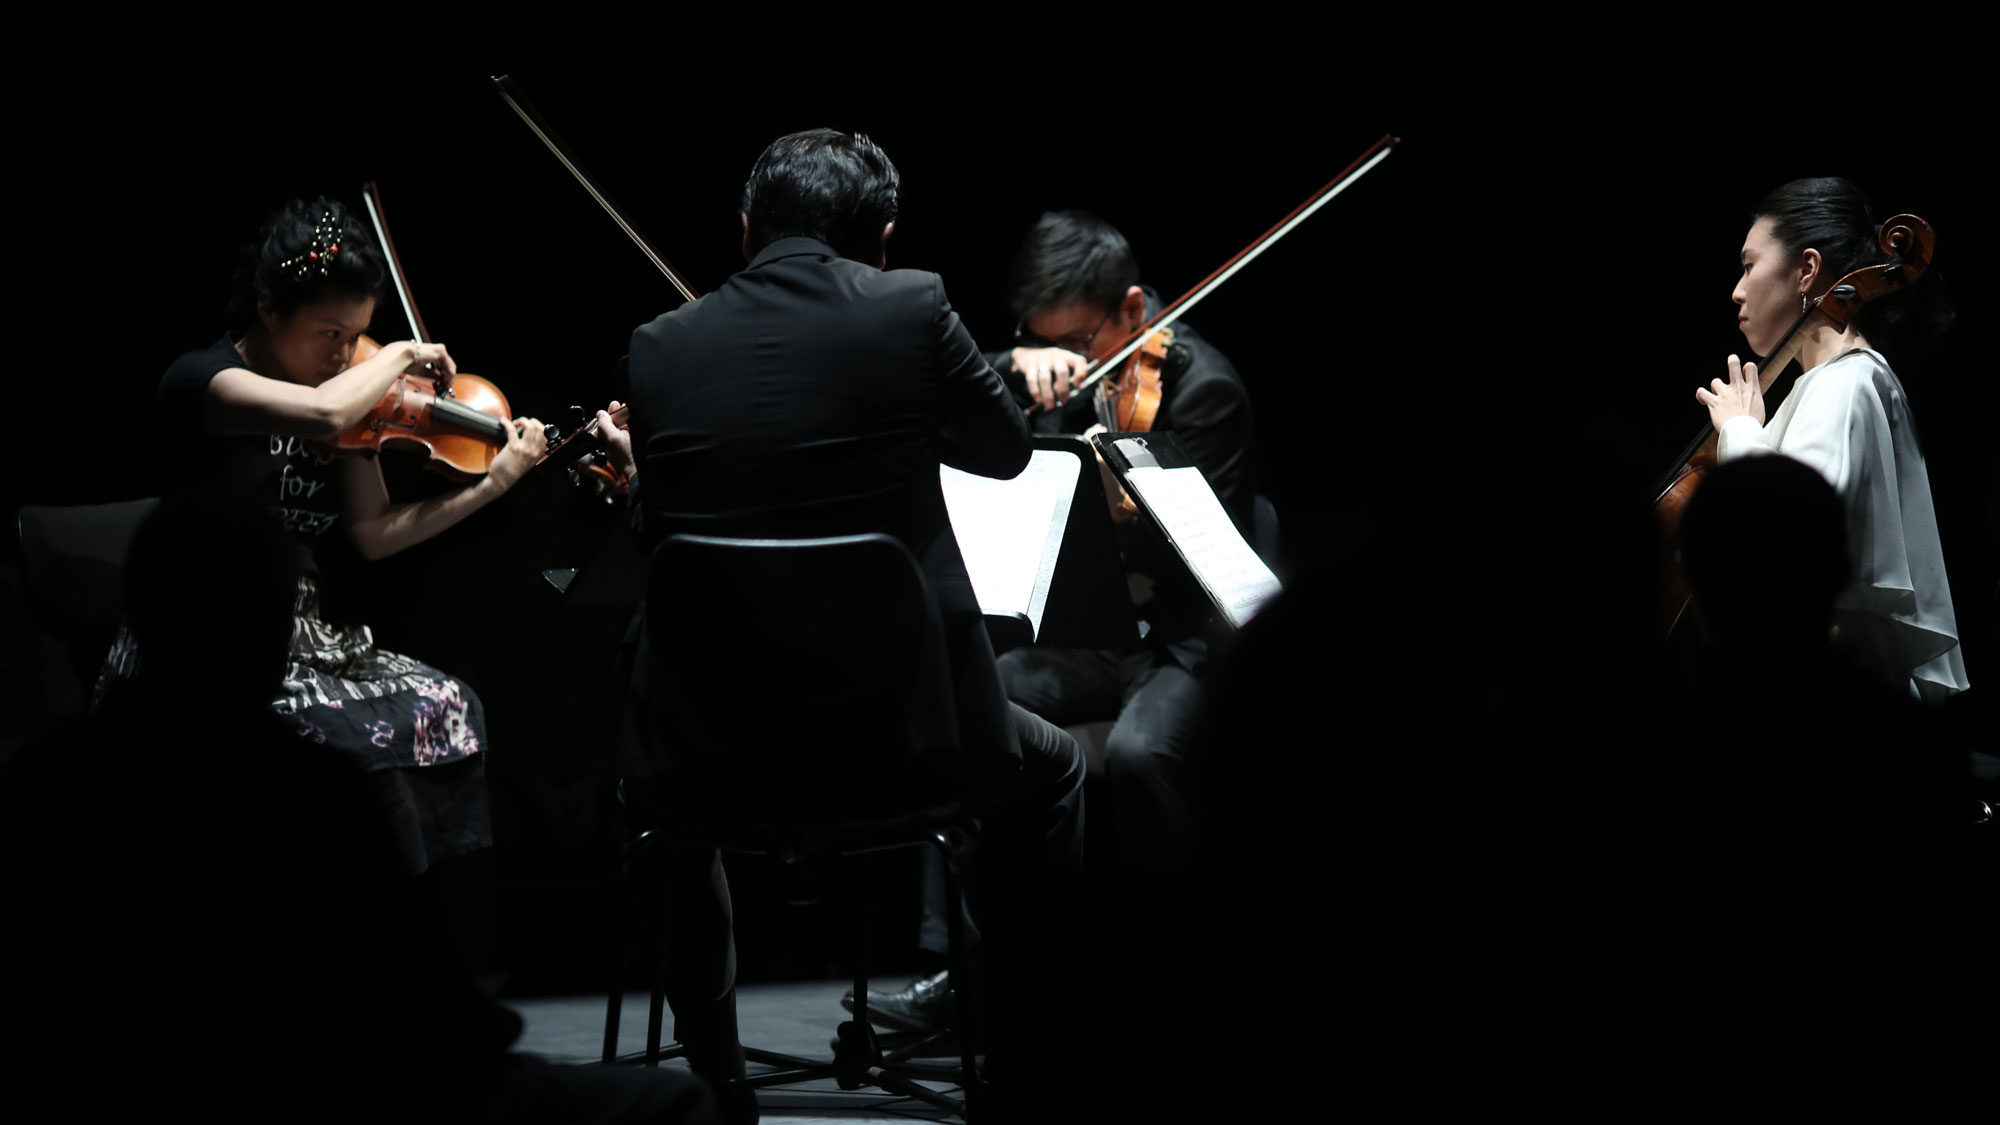 Formosa Quartet actively playing in concert under a spotlight on a dark stage. 